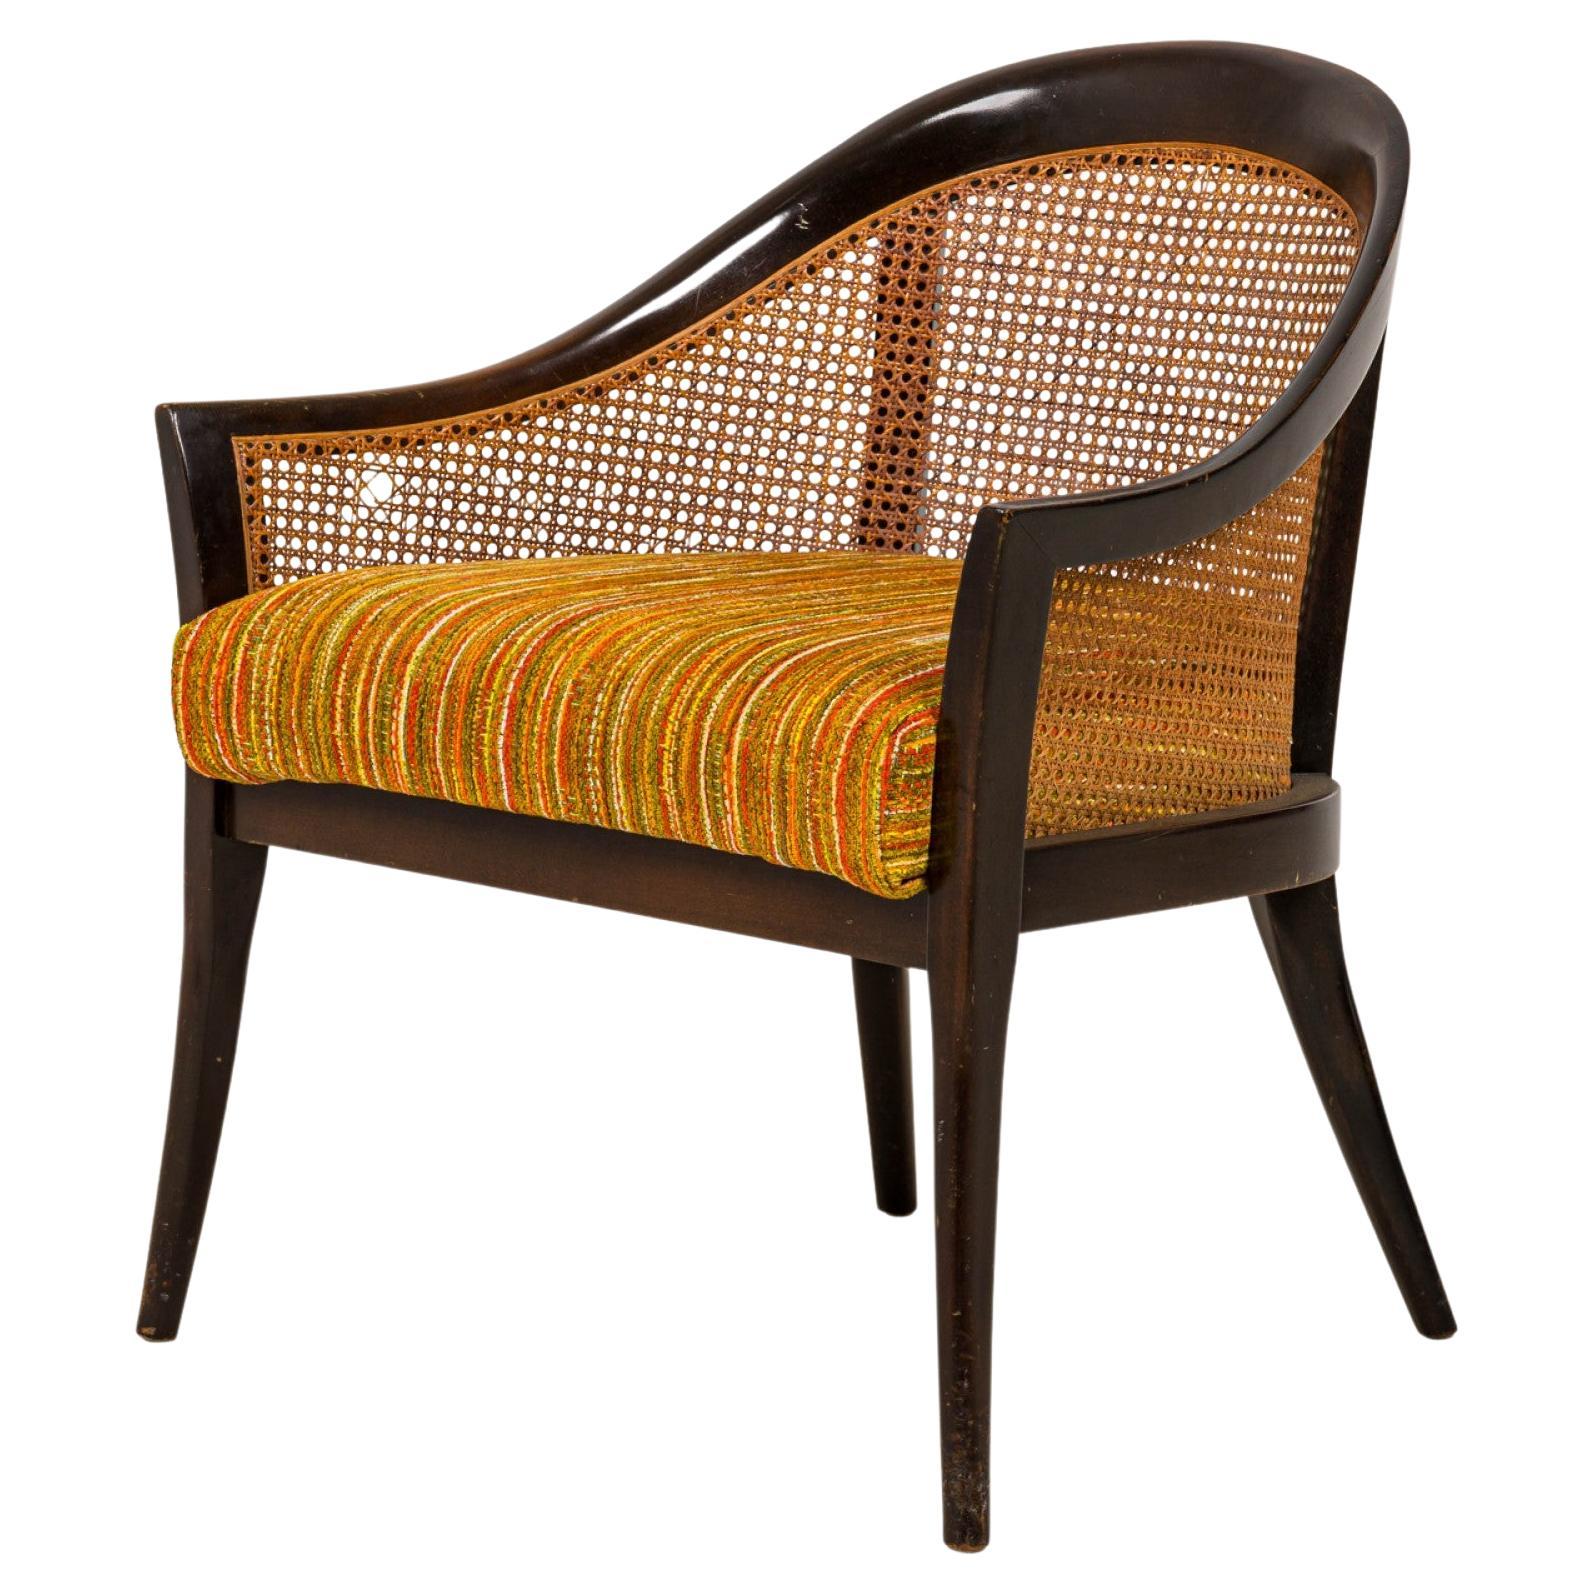 Harvey Probber Dark Wood, Caning, and Striped Upholstery Armchair For Sale